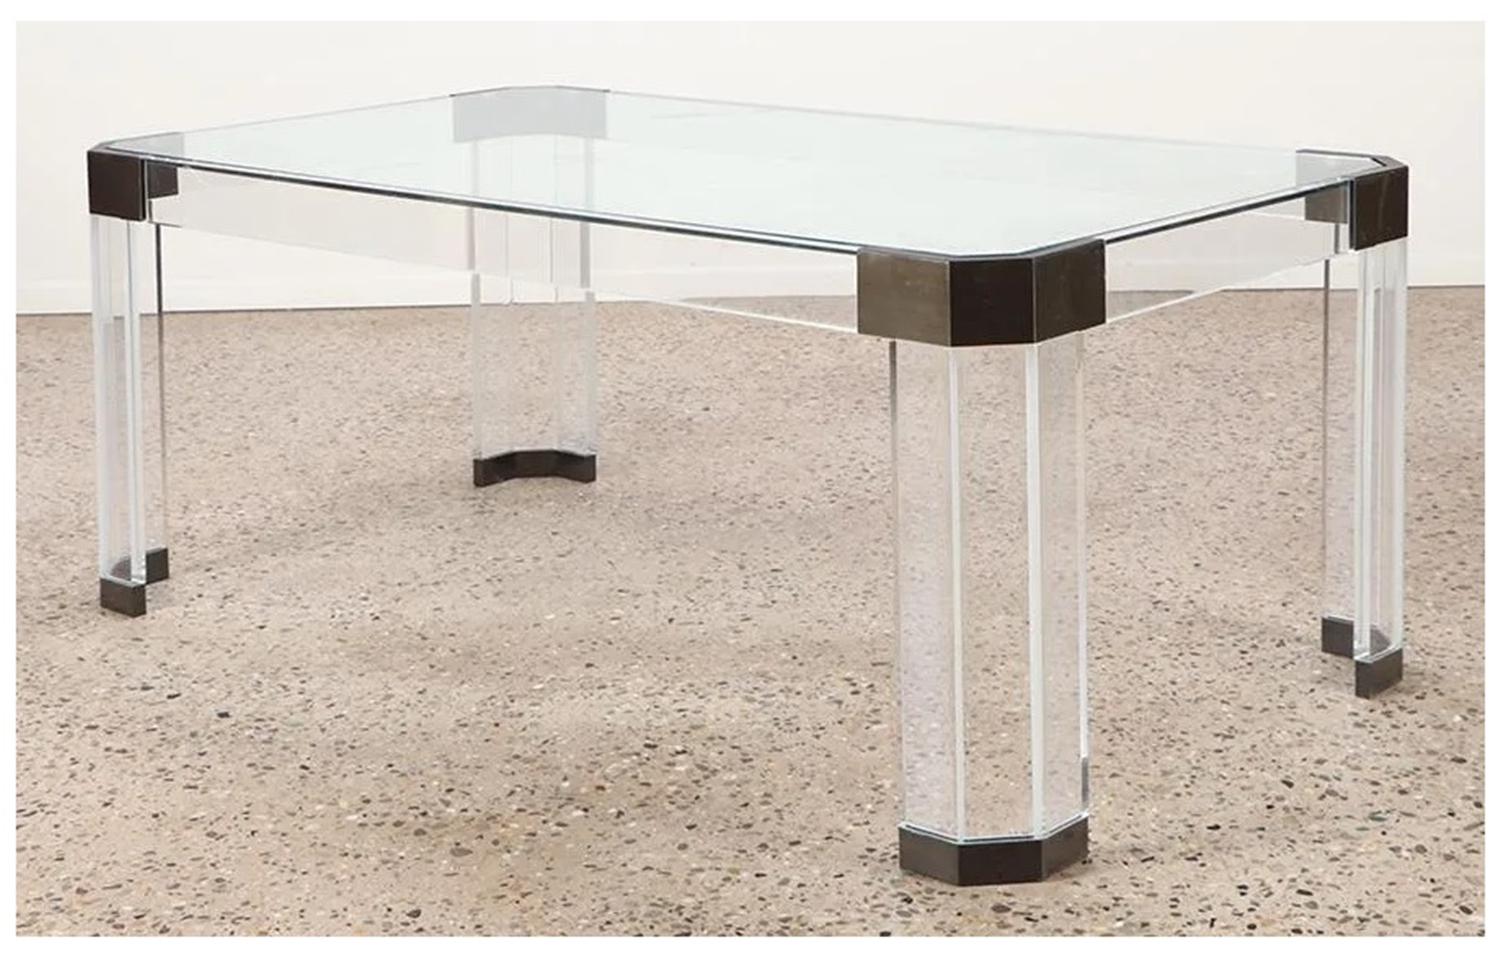 Introducing the lucite, Glass and Brass Dining Table by Charles Hollis Jones, a stunning piece of furniture from the USA in the 1970s. This rectangular table features a clear glass top that showcases the exquisite antique brass accents on the legs.